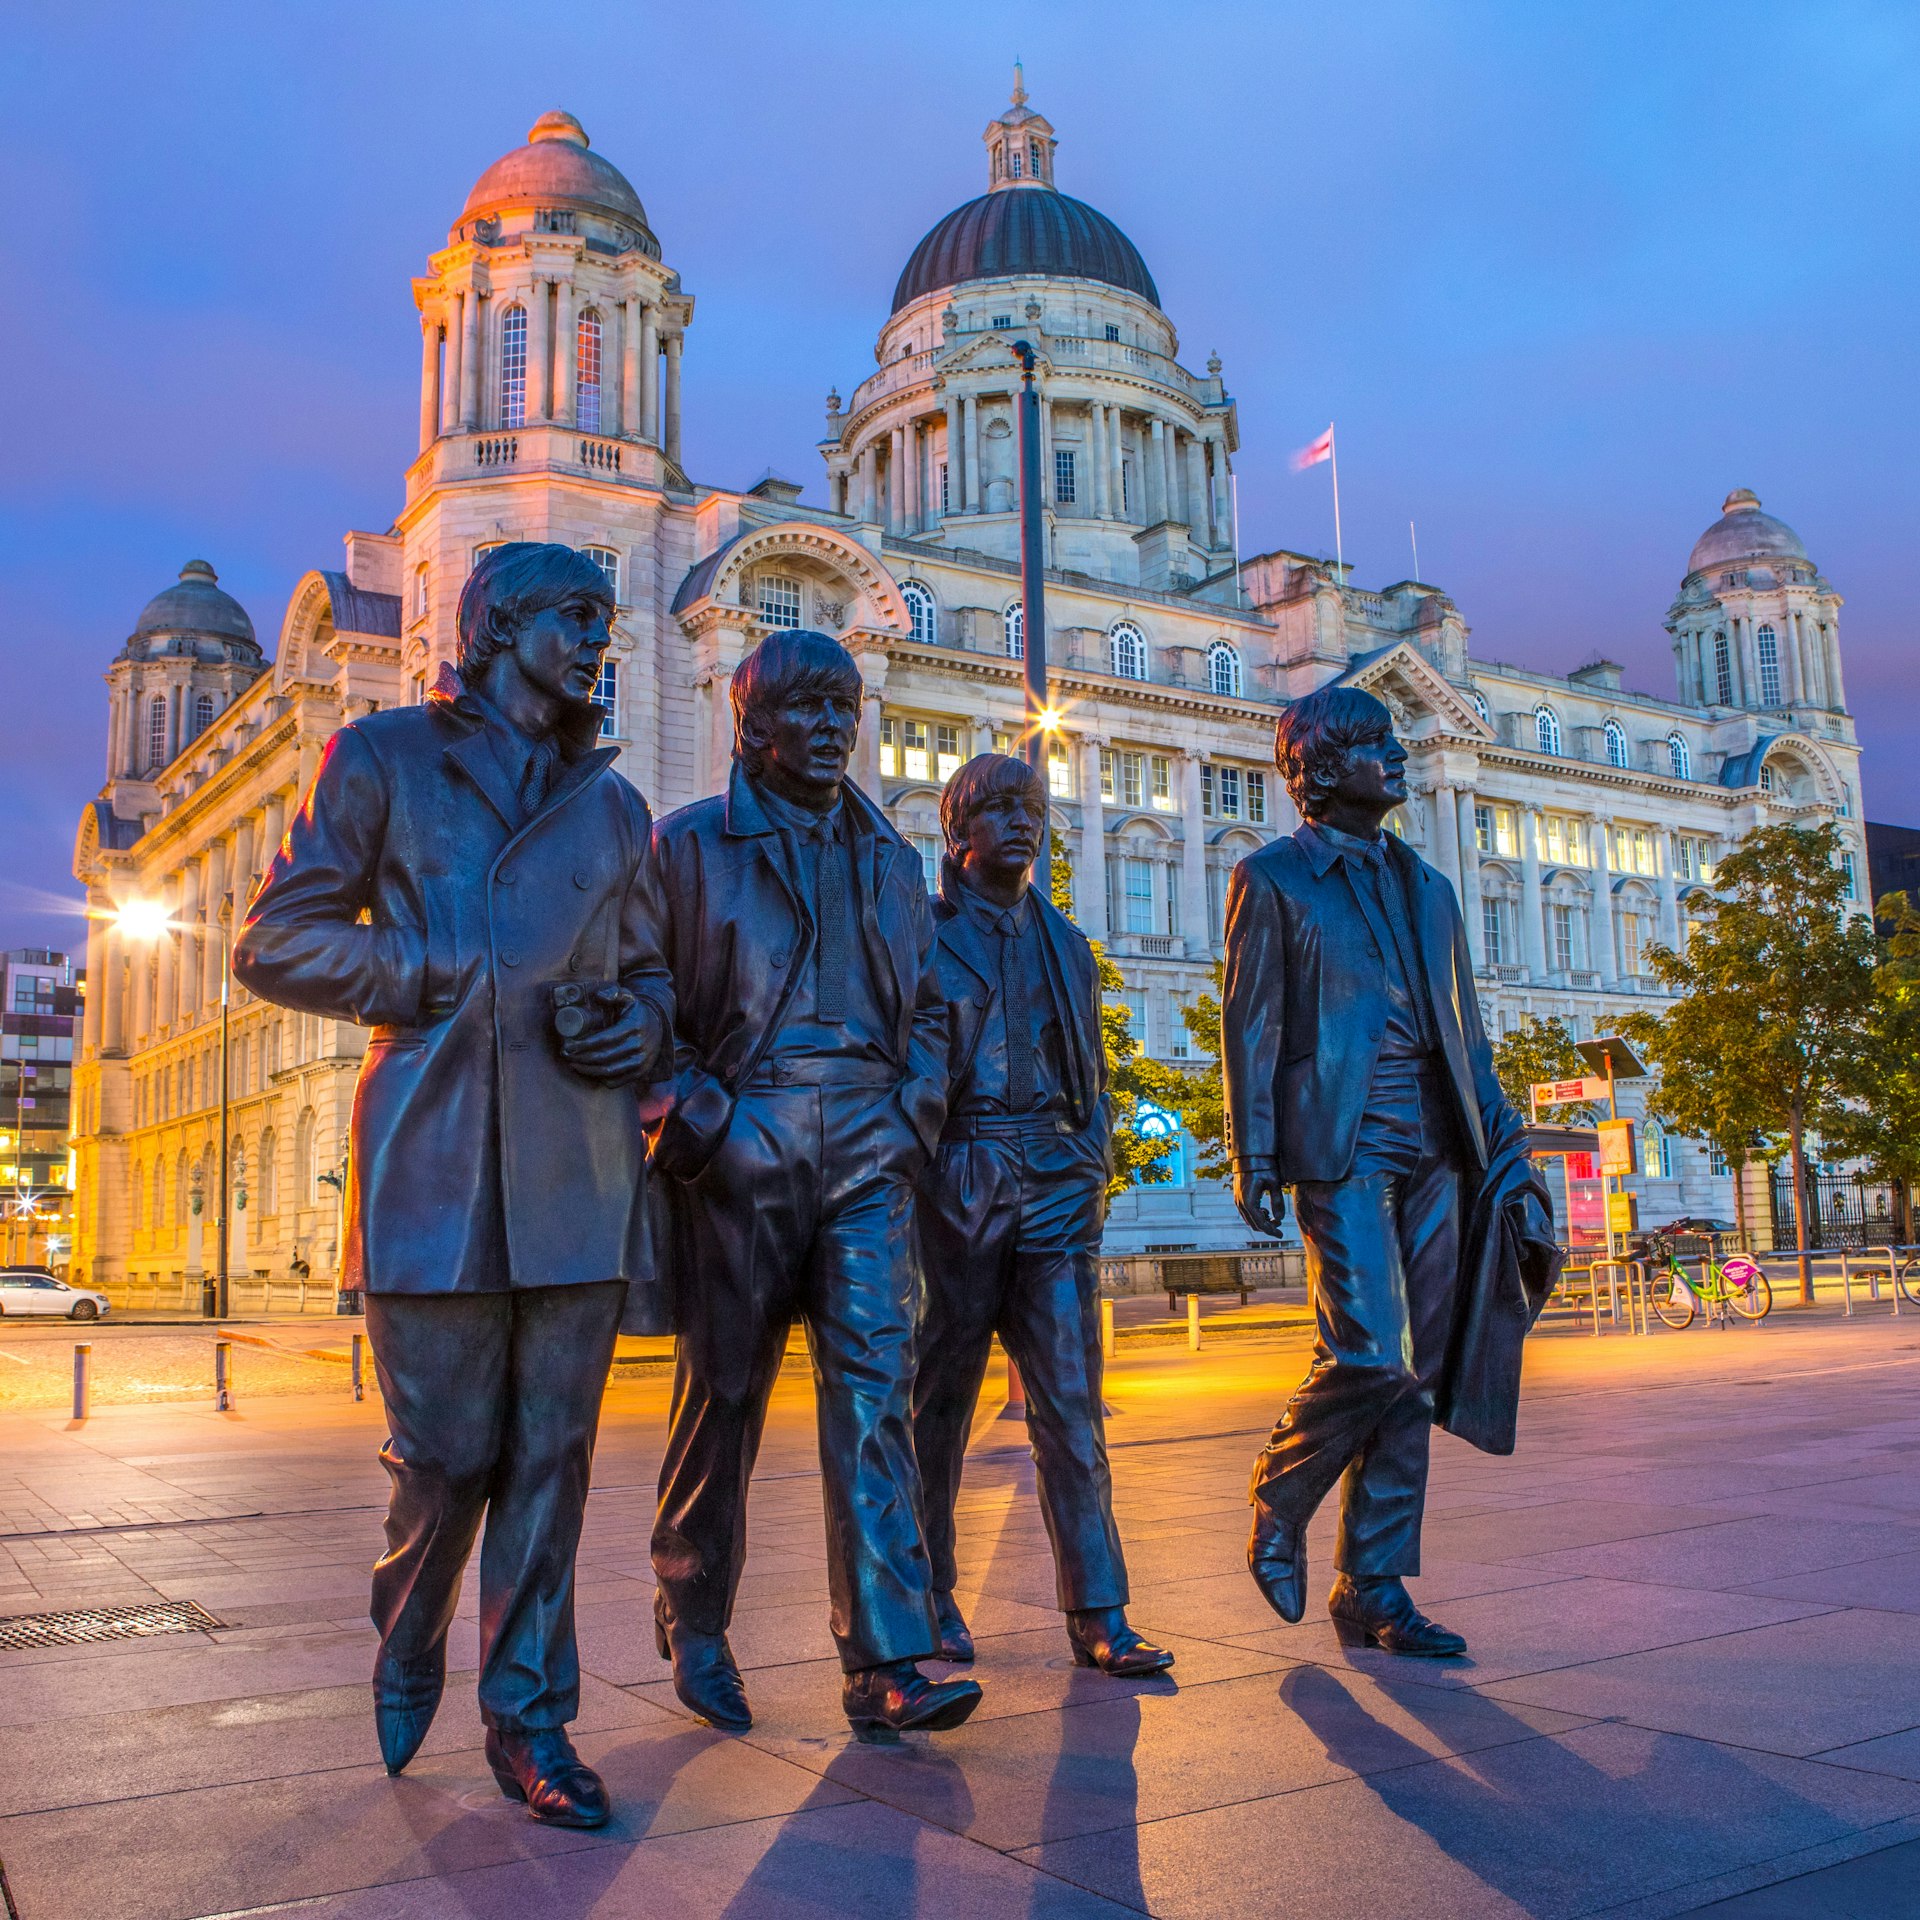 29 July, 2018: Statue of The Beatles at Pier Head in Liverpool at night.